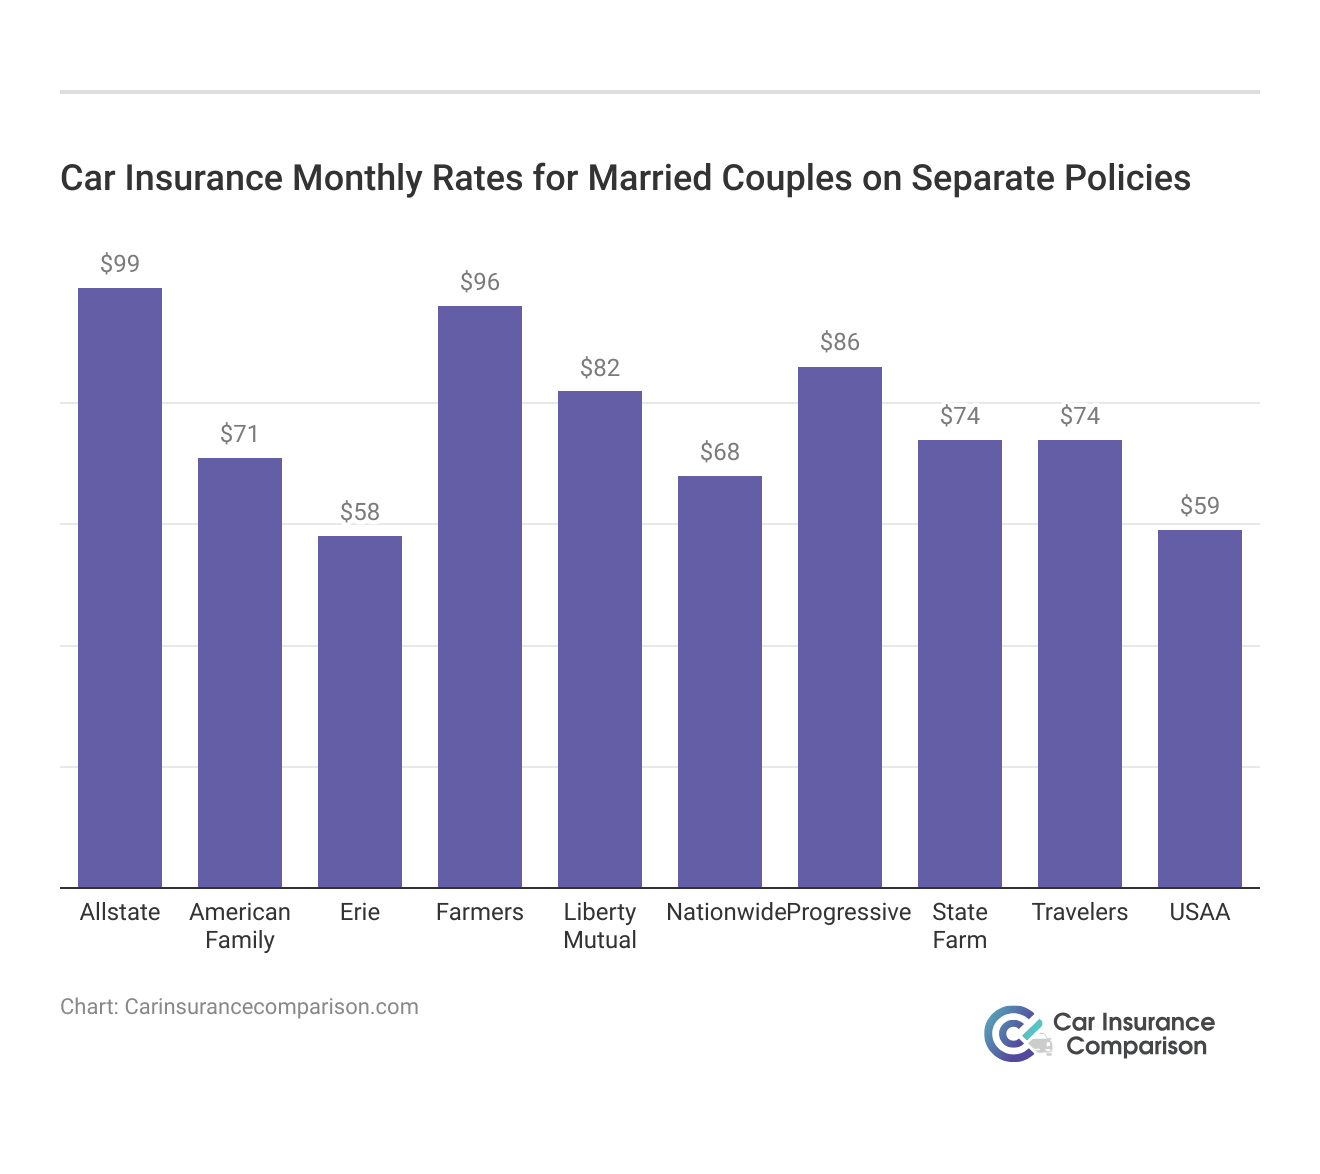 <h3>Car Insurance Monthly Rates for Married Couples on Separate Policies</h3>